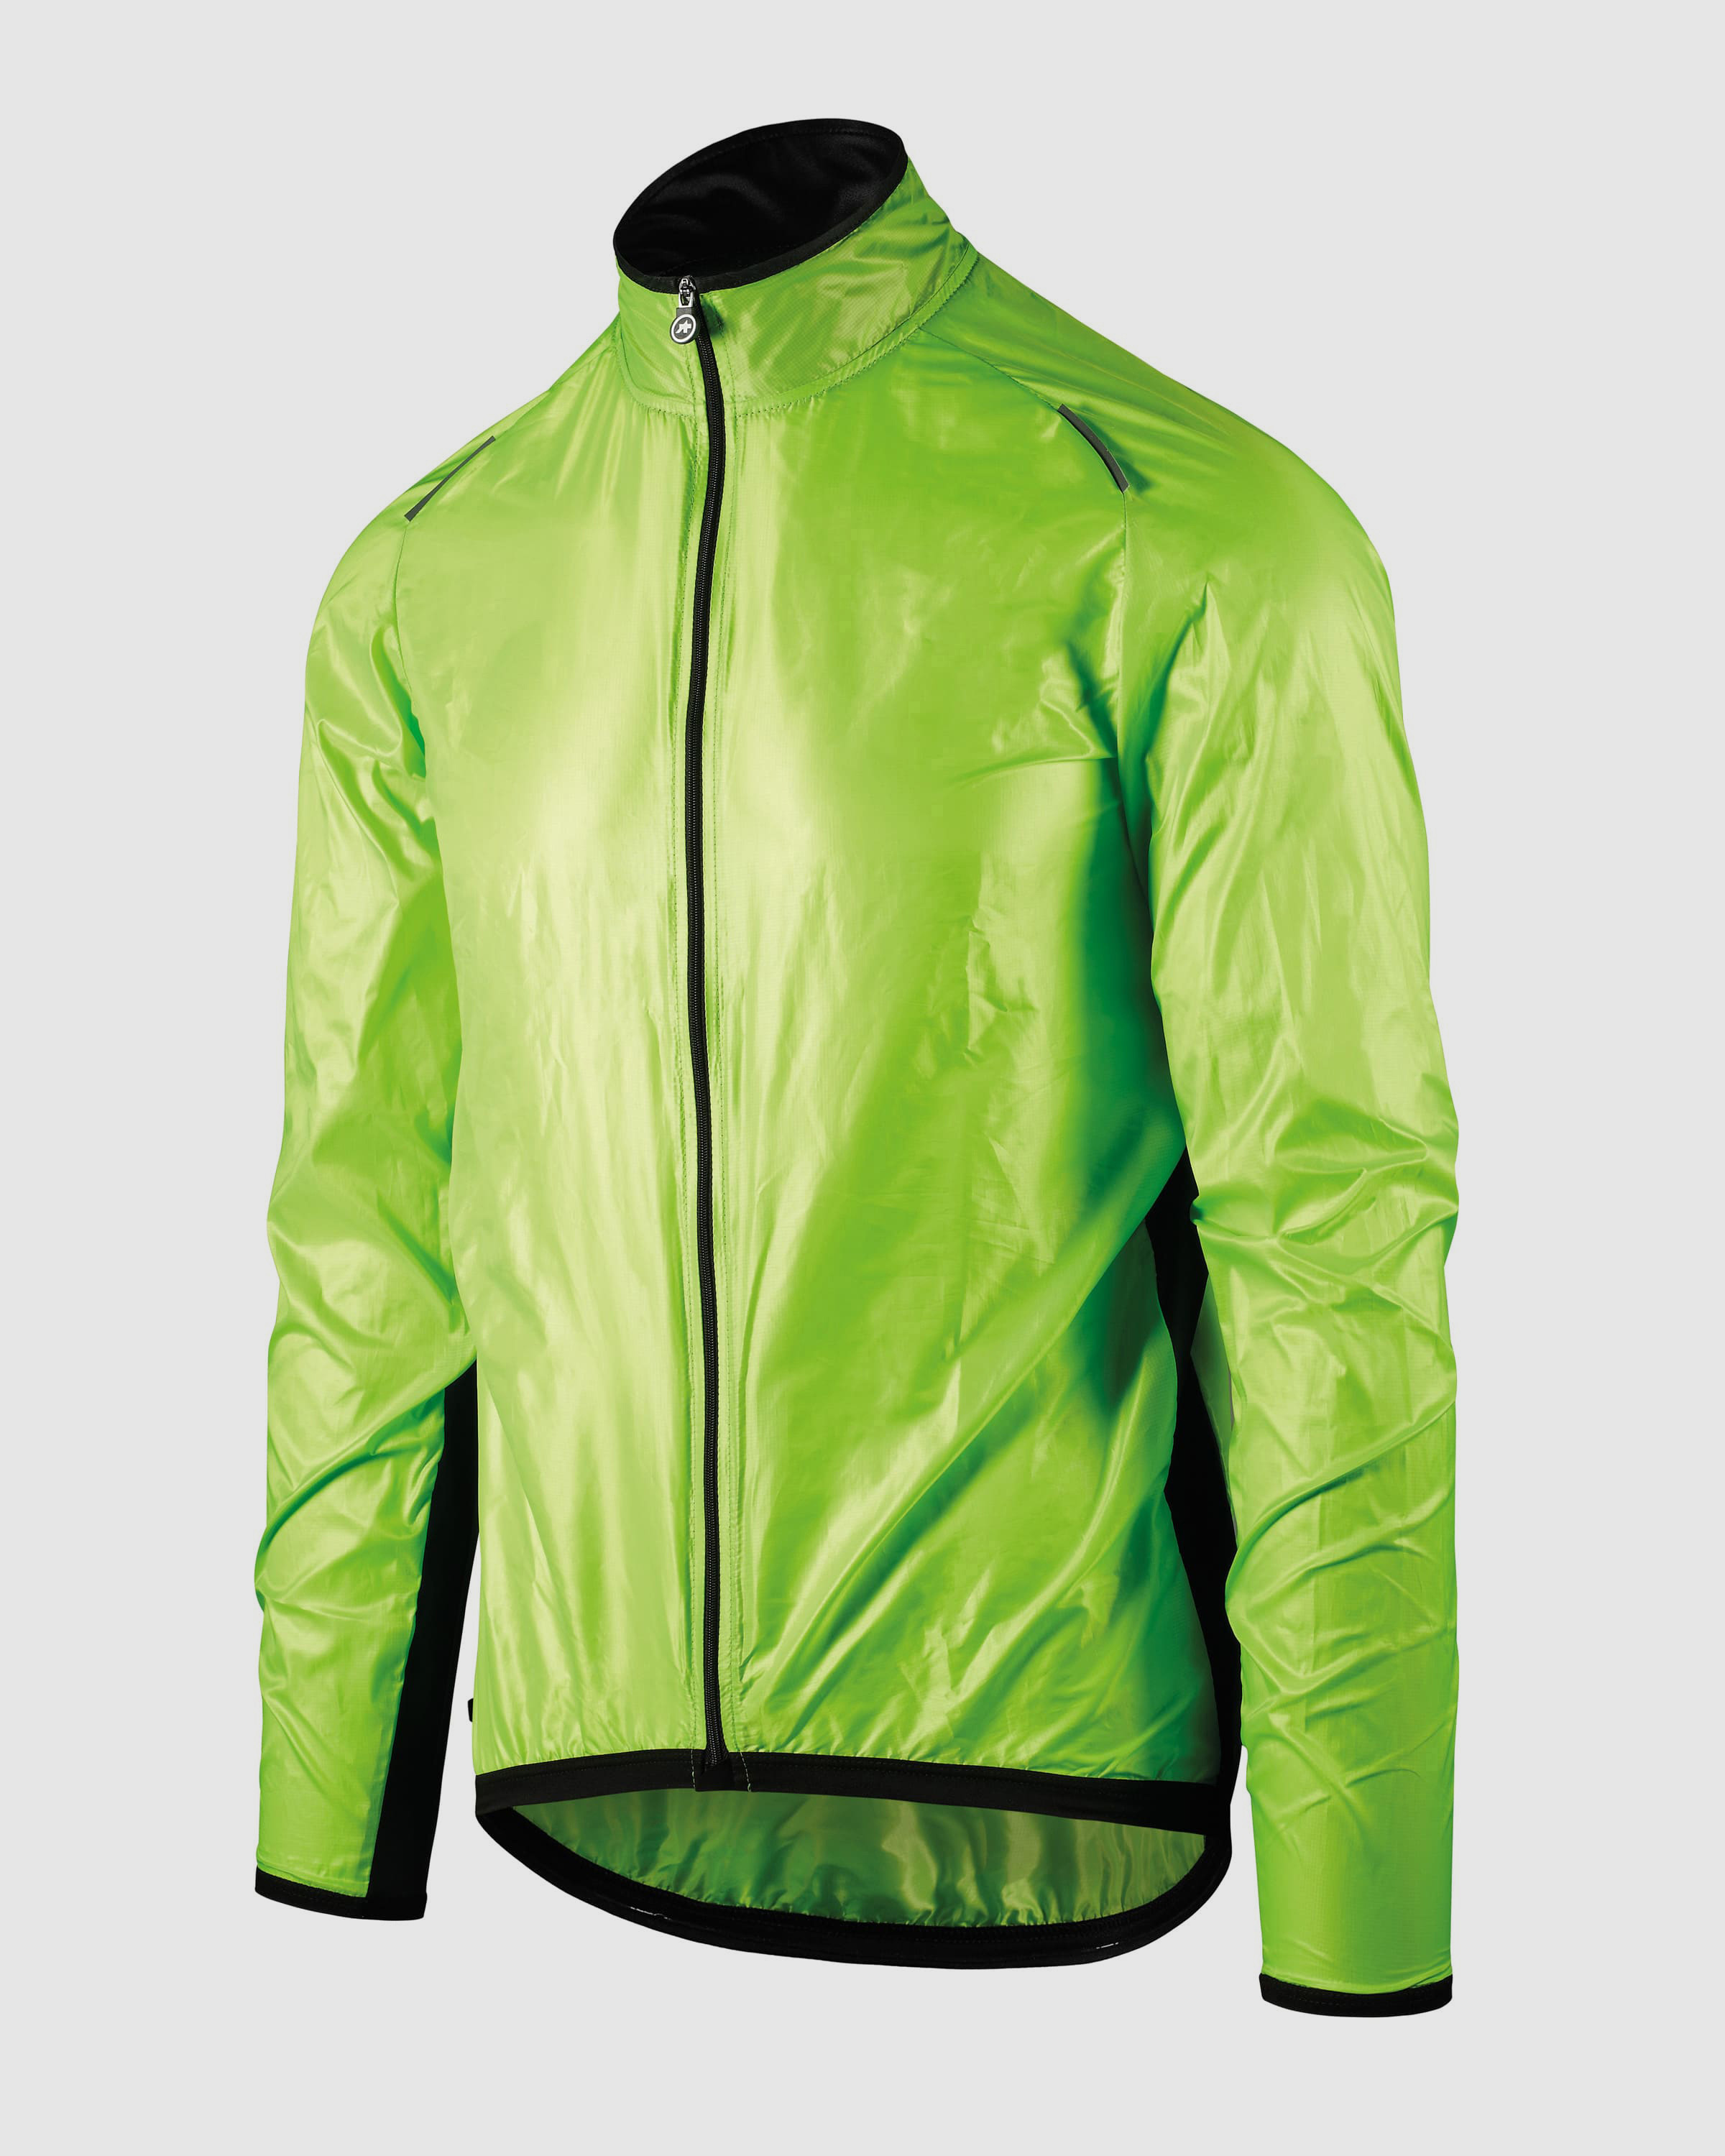 MILLE GT wind jacket - ASSOS Of Switzerland - Official Outlet